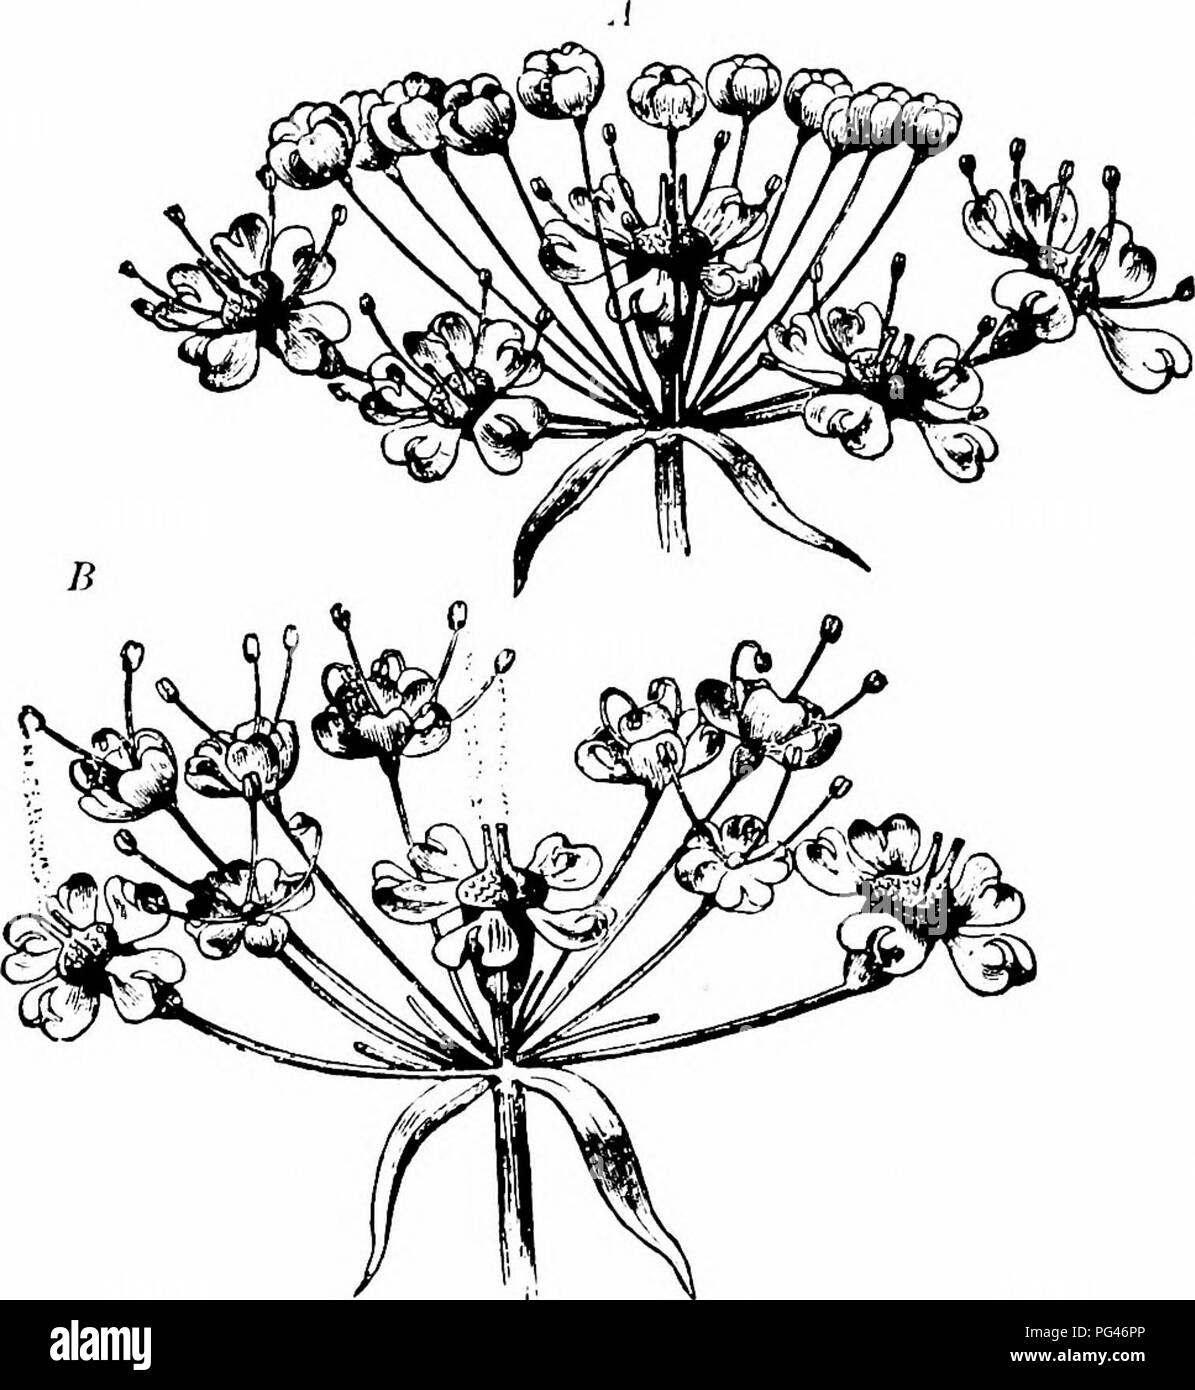 . Handbook of flower pollination : based upon Hermann Mu?ller's work 'The fertilisation of flowers by insects' . Fertilization of plants. UMBELLIFERAE 463 2. Flowers strongly protandrous (those of the ultimate lateral umbels being male by reduction). The commonest case. B. Flowers pleomorphous (5 and S) in the primary umbels. 3. Here belong the common cases of andromonoecism; e. g. Astrantia major J.., Chaerophyllum aromaticum L., Scandi.x Pecten-Veneris L., Torilis Anthriscus flernh.. and so forth. 4. Well-marked monoecism ; e. g. Echinojjhora. 5. Well-marked dioecism ; e. g. Arctopus. C. Flo Stock Photo